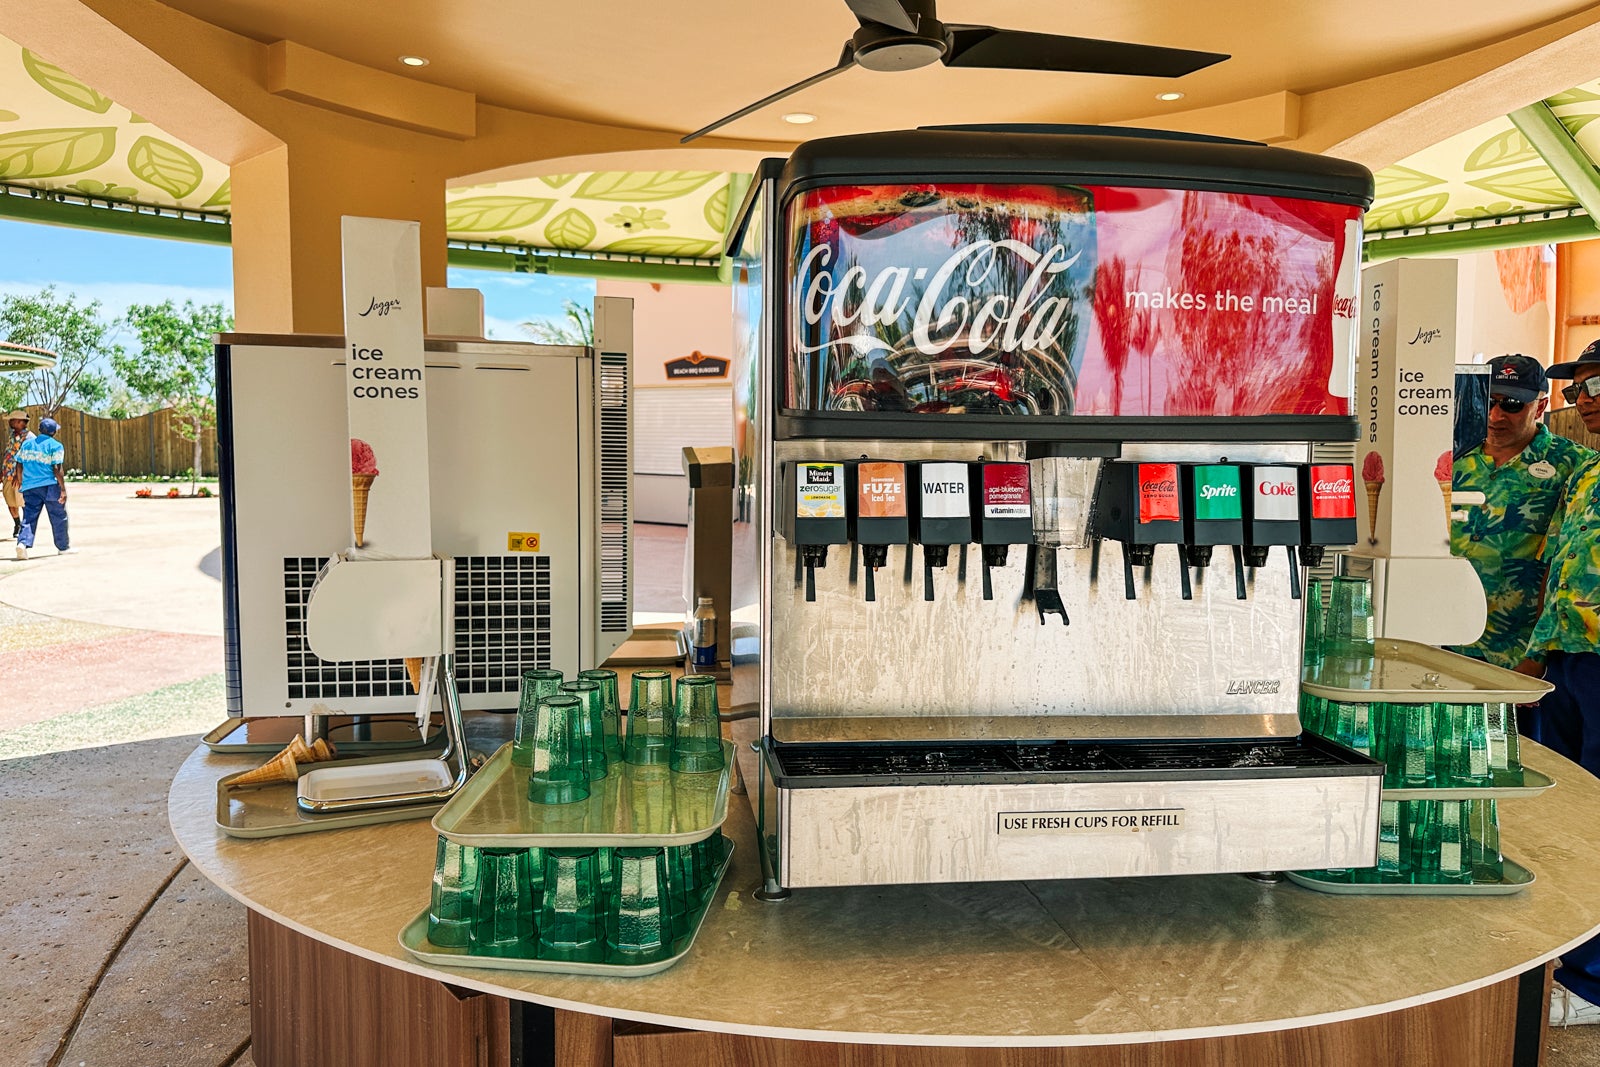 A soda dispenser with cups beside it